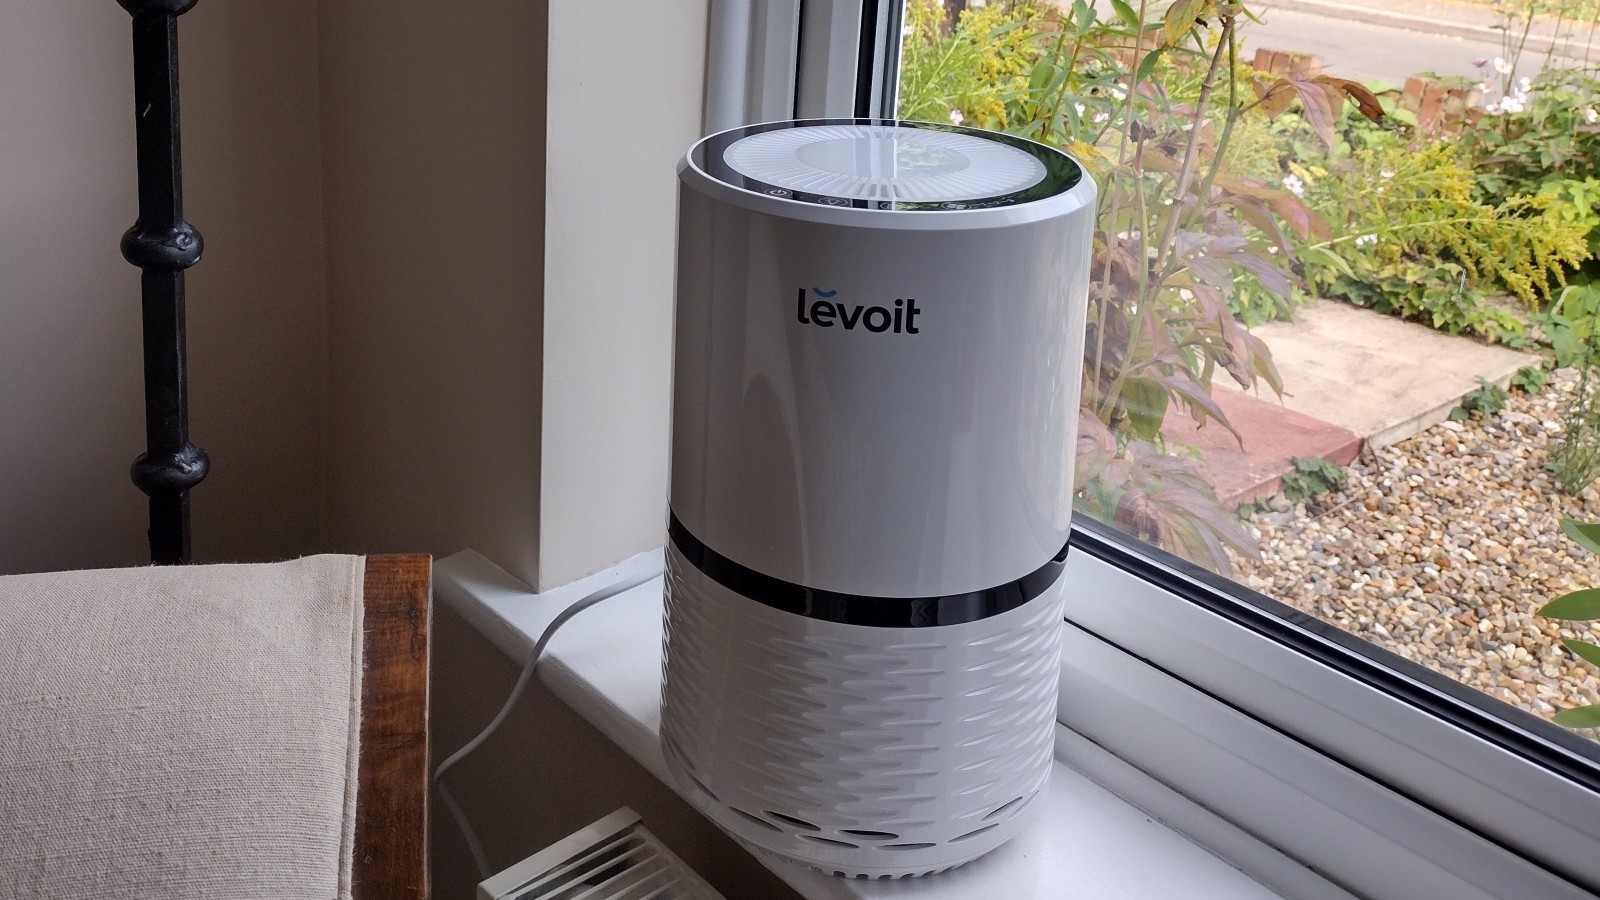 Levoit H132 review: Image shows the air purifier on a windowsill.